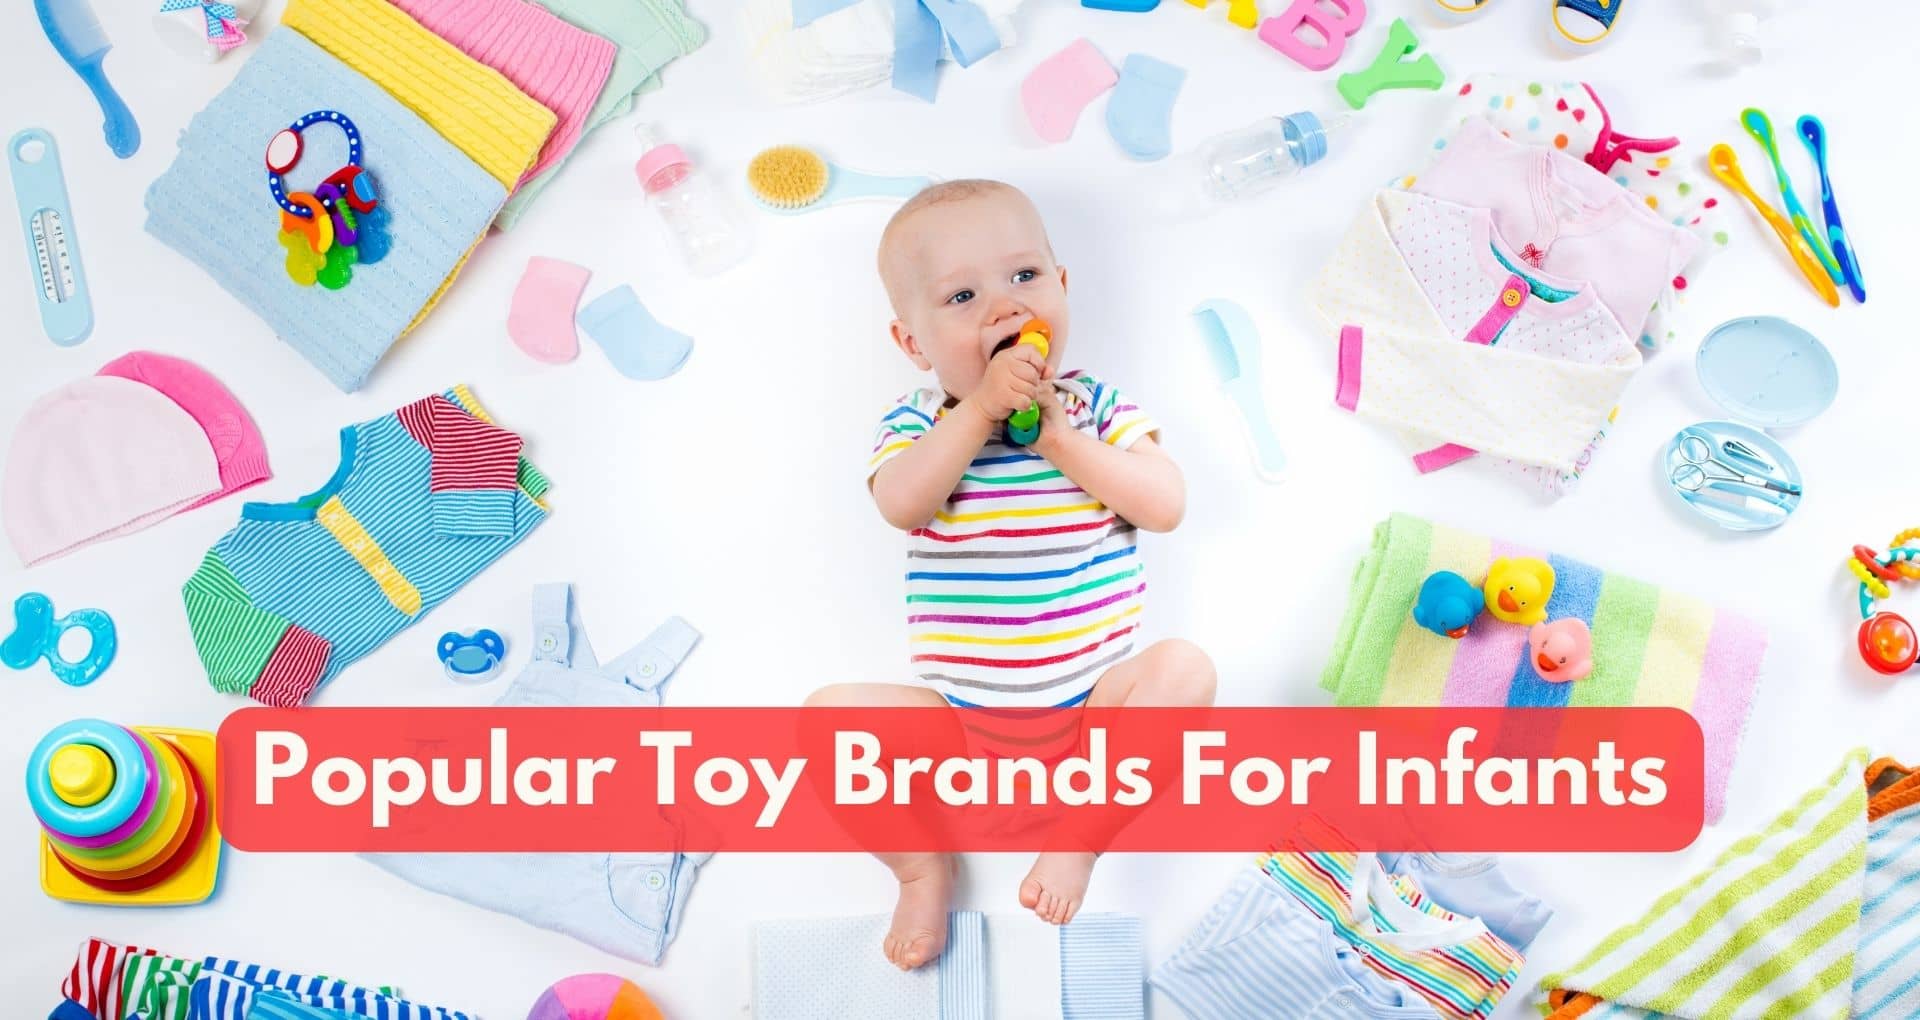 What Are The Best Baby Toy Brands?